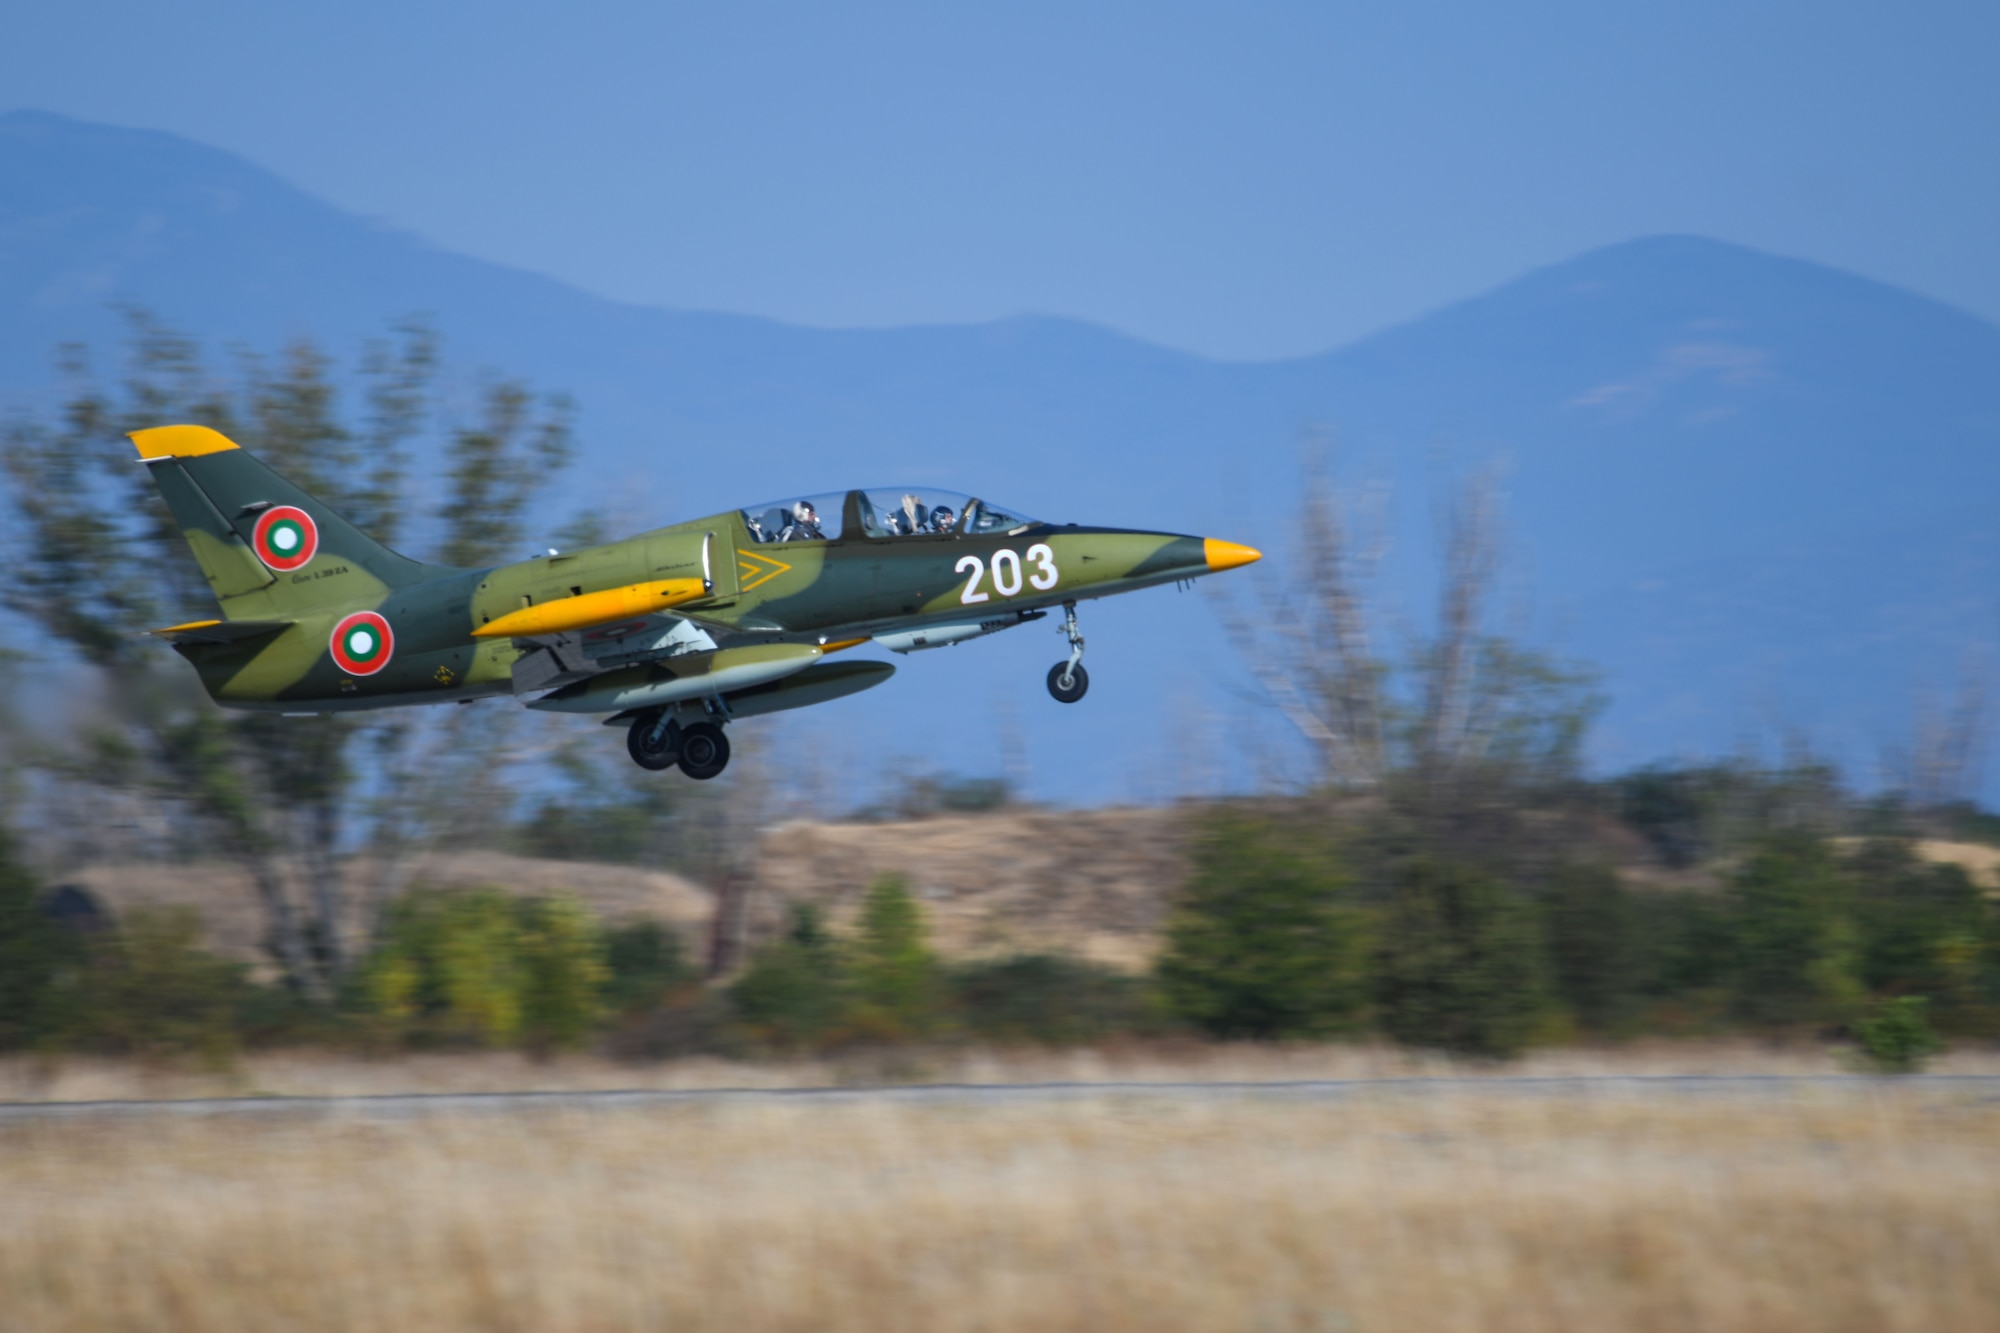 A Bulgarian air force Aero L-39 Albatros takes off during exercise Thracian Viper 20, Sept. 23, 2020, at Graf Ignatievo Air Base, Bulgaria. Thracian Viper 20 is a multilateral training exercise with the Bulgarian air force, aimed to increase operational capacity, capability and interoperability with Bulgaria. Successful partnering activities like this result in progressive relationships and lead to tangible, mutual benefits during peacetime, contingencies and crisis, through actions such as regional security, access and coalition operations. (U.S. Air Force photo by Airman 1st Class Ericka A. Woolever)